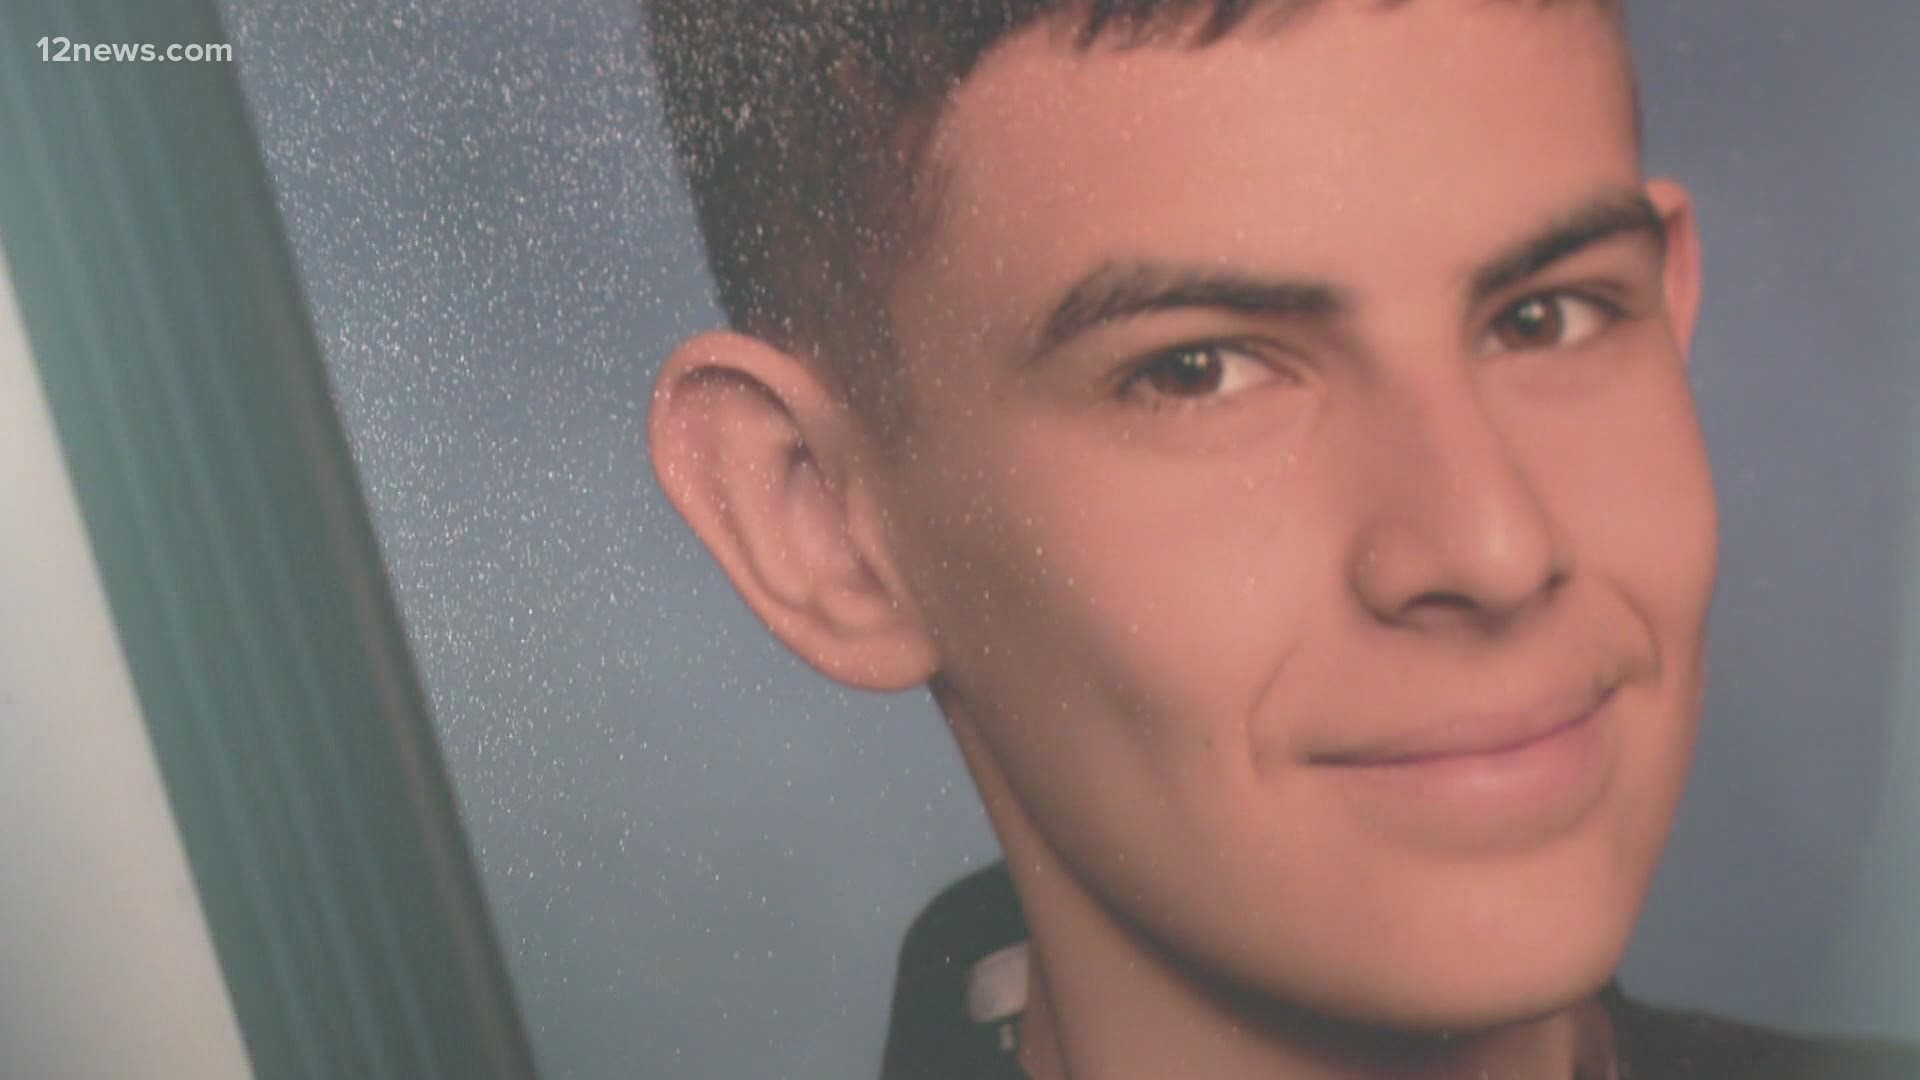 It's been nearly two years since Adrio Romine, a 17-year old valedictorian at Chandler High School, died by suicide following weeks of messaging with a stranger.